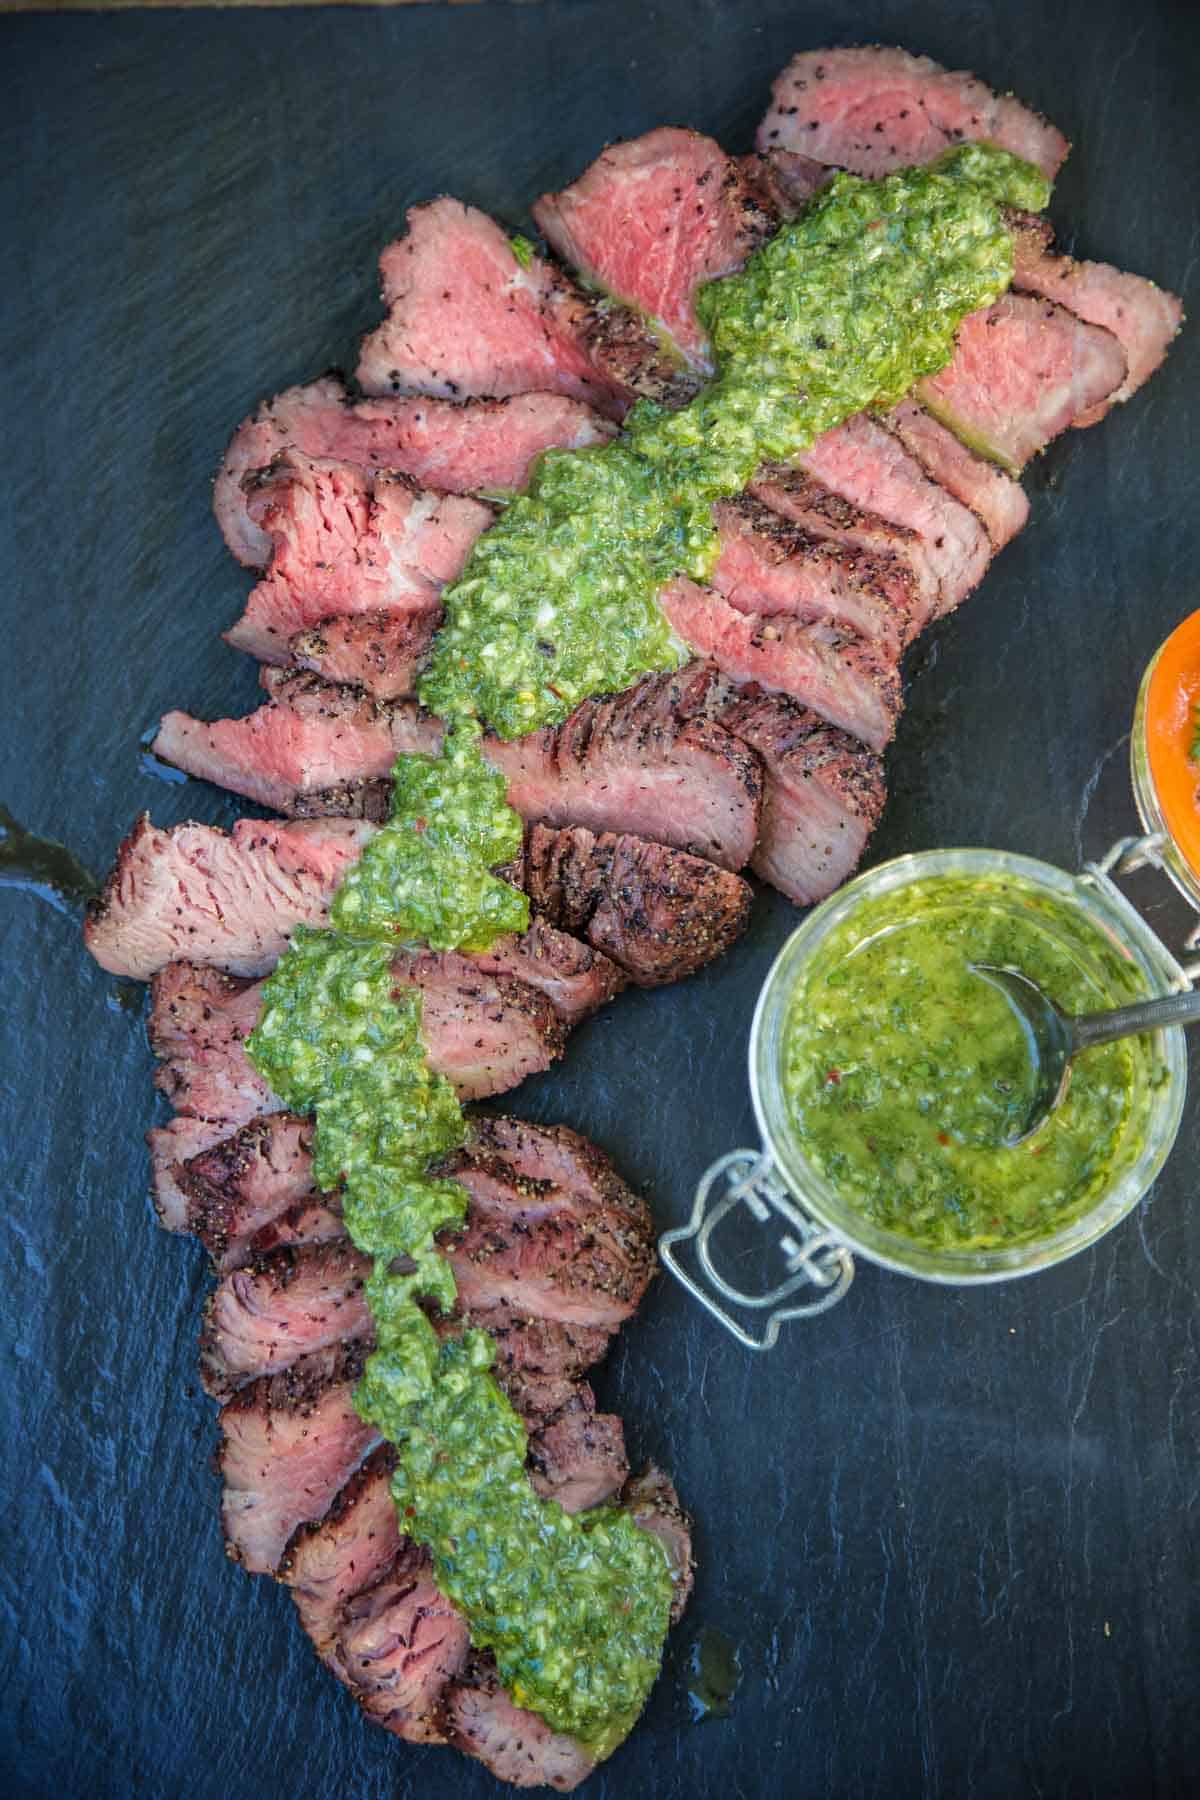 Slices of smoked Tri Tip with homemade Chimichurri sauce on tip